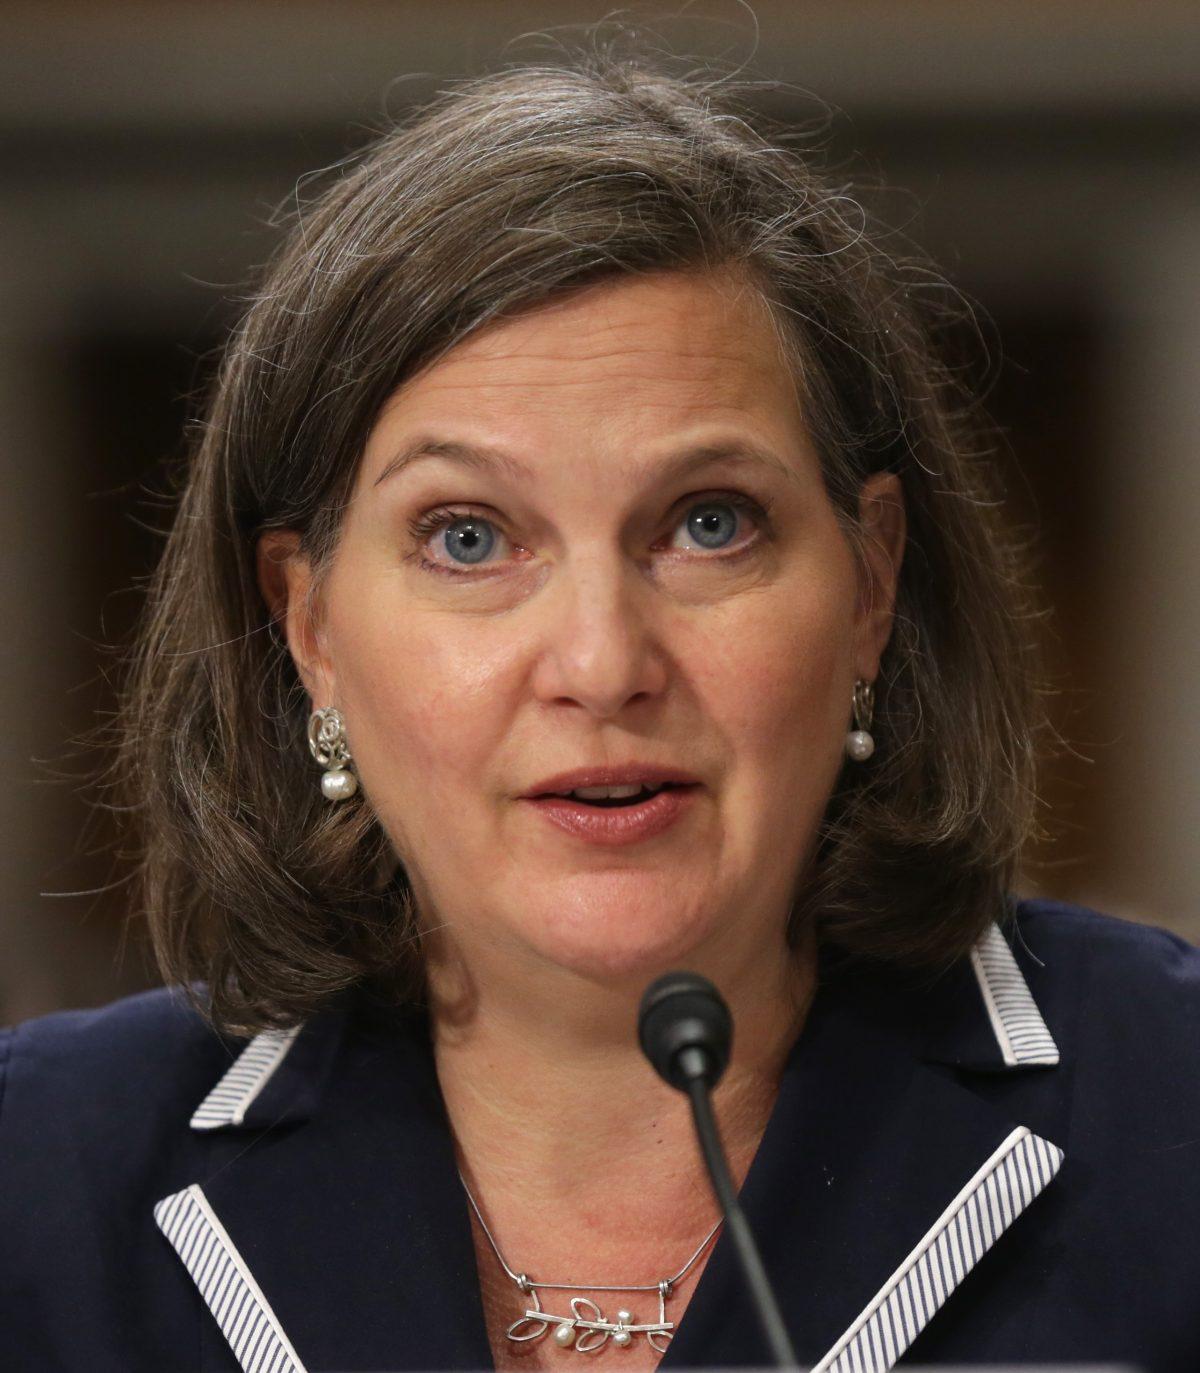 Assistant Secretary of State for European and Eurasian Affairs Victoria Nuland. (Alex Wong/Getty Images)